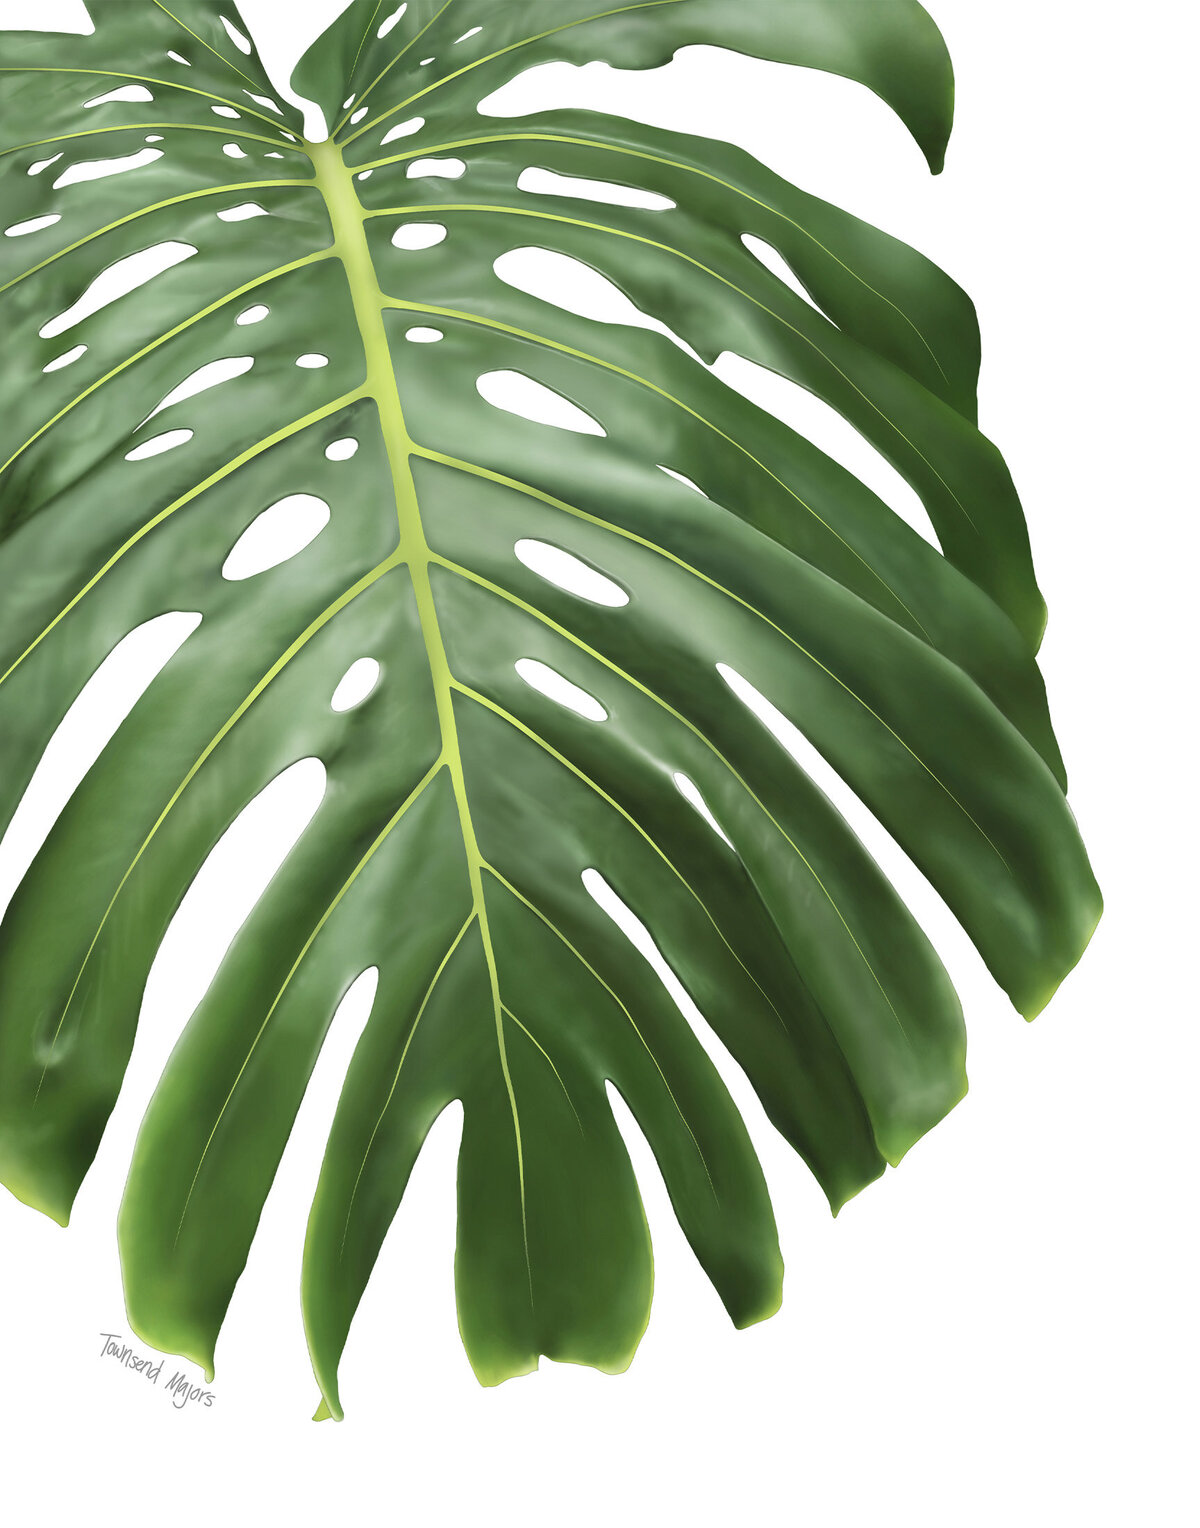 Townsend Majors illustration of a monstera plant